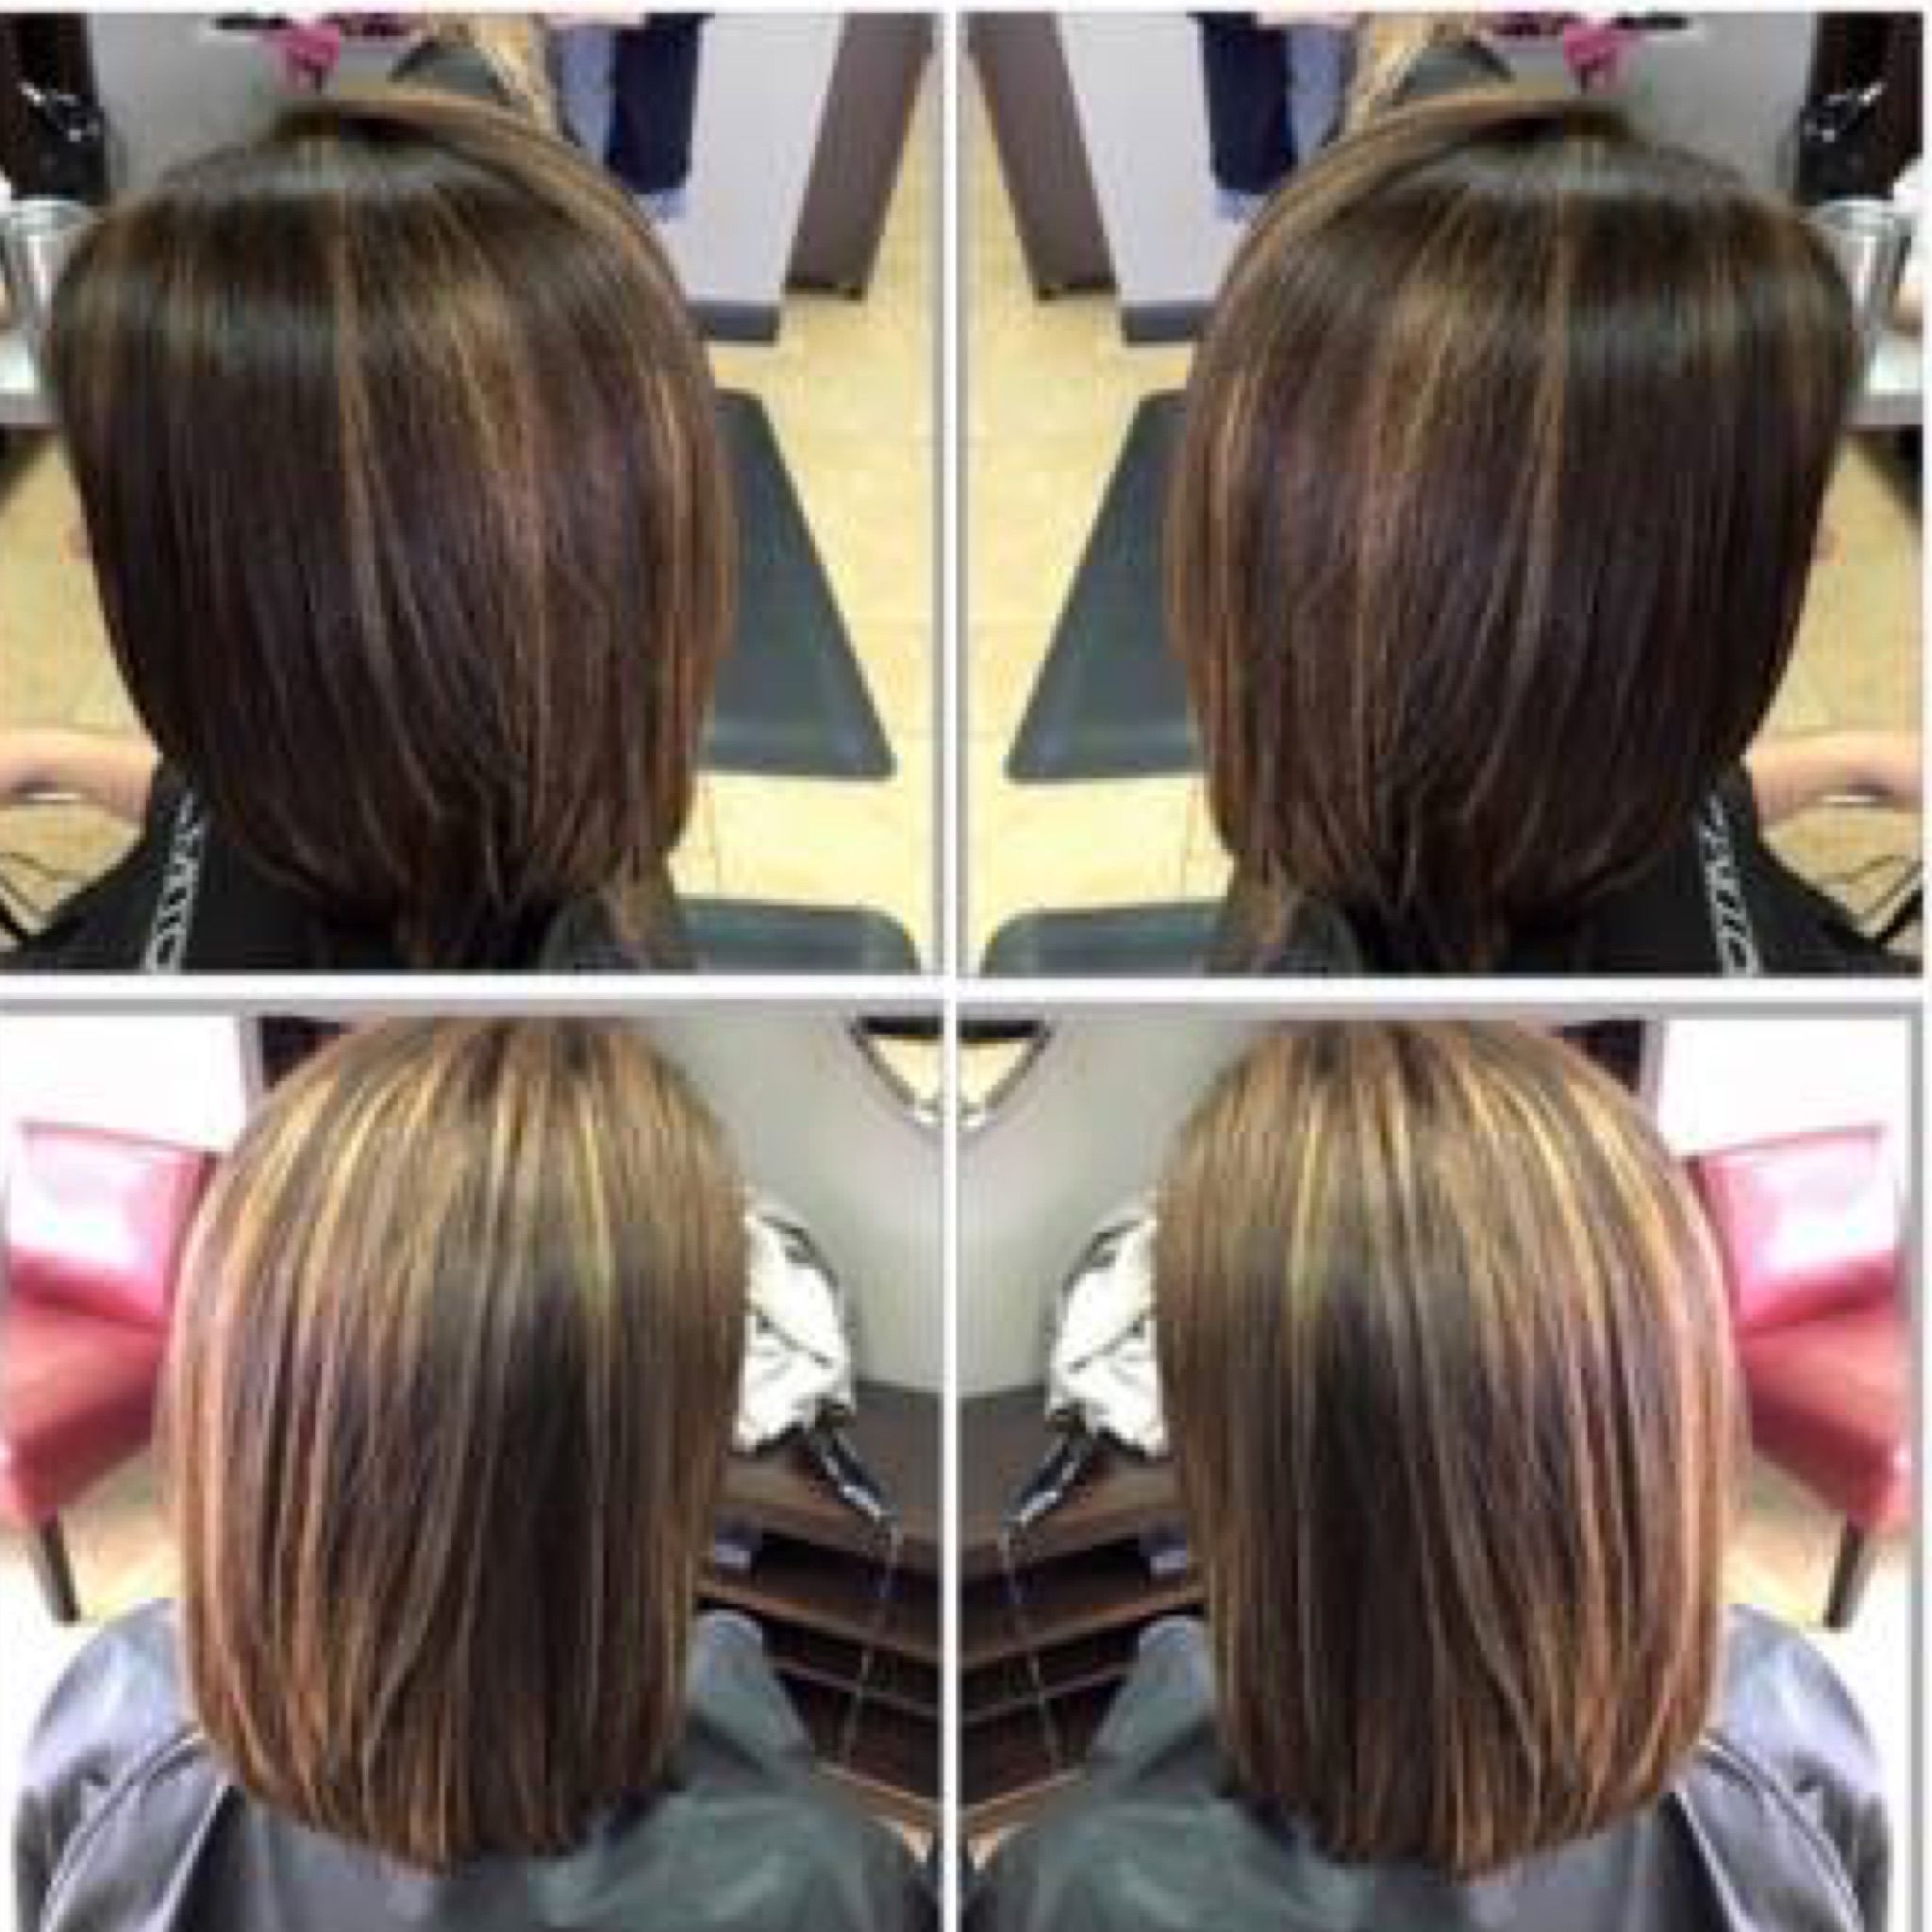 A dark brown angled bob with warm highlights done by Beth